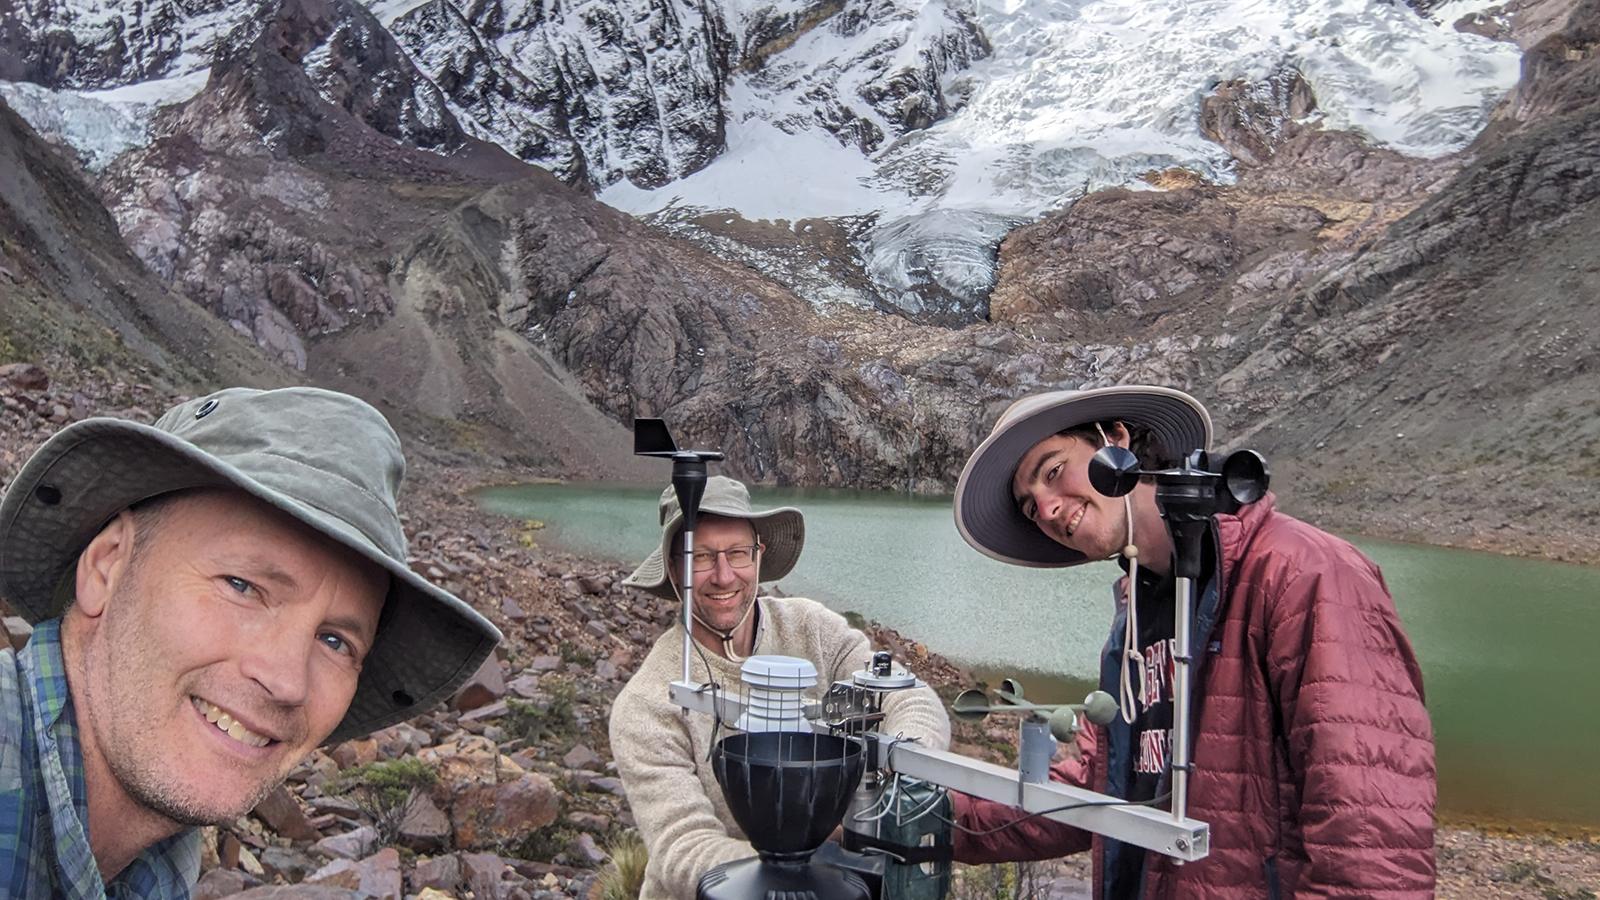 Bryan Mark and colleagues researching glacier change in Peru